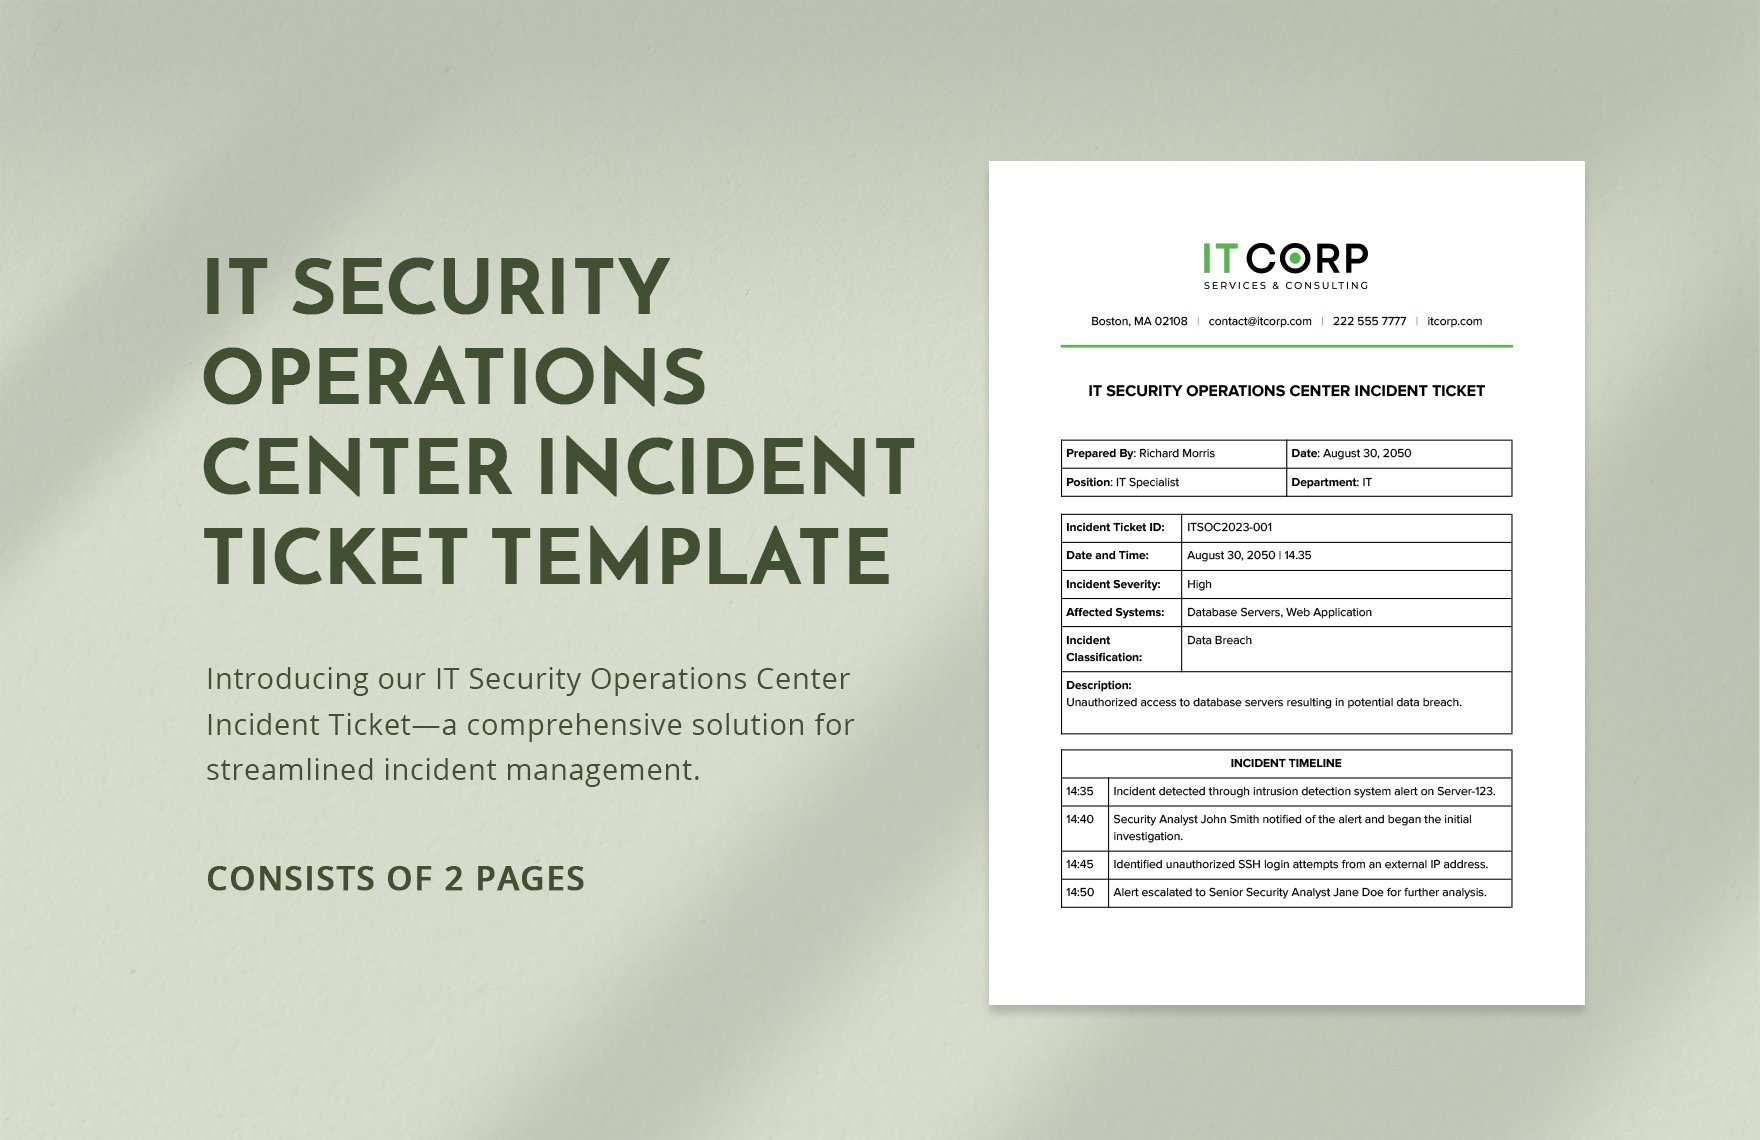 IT Security Operations Center Incident Ticket Template